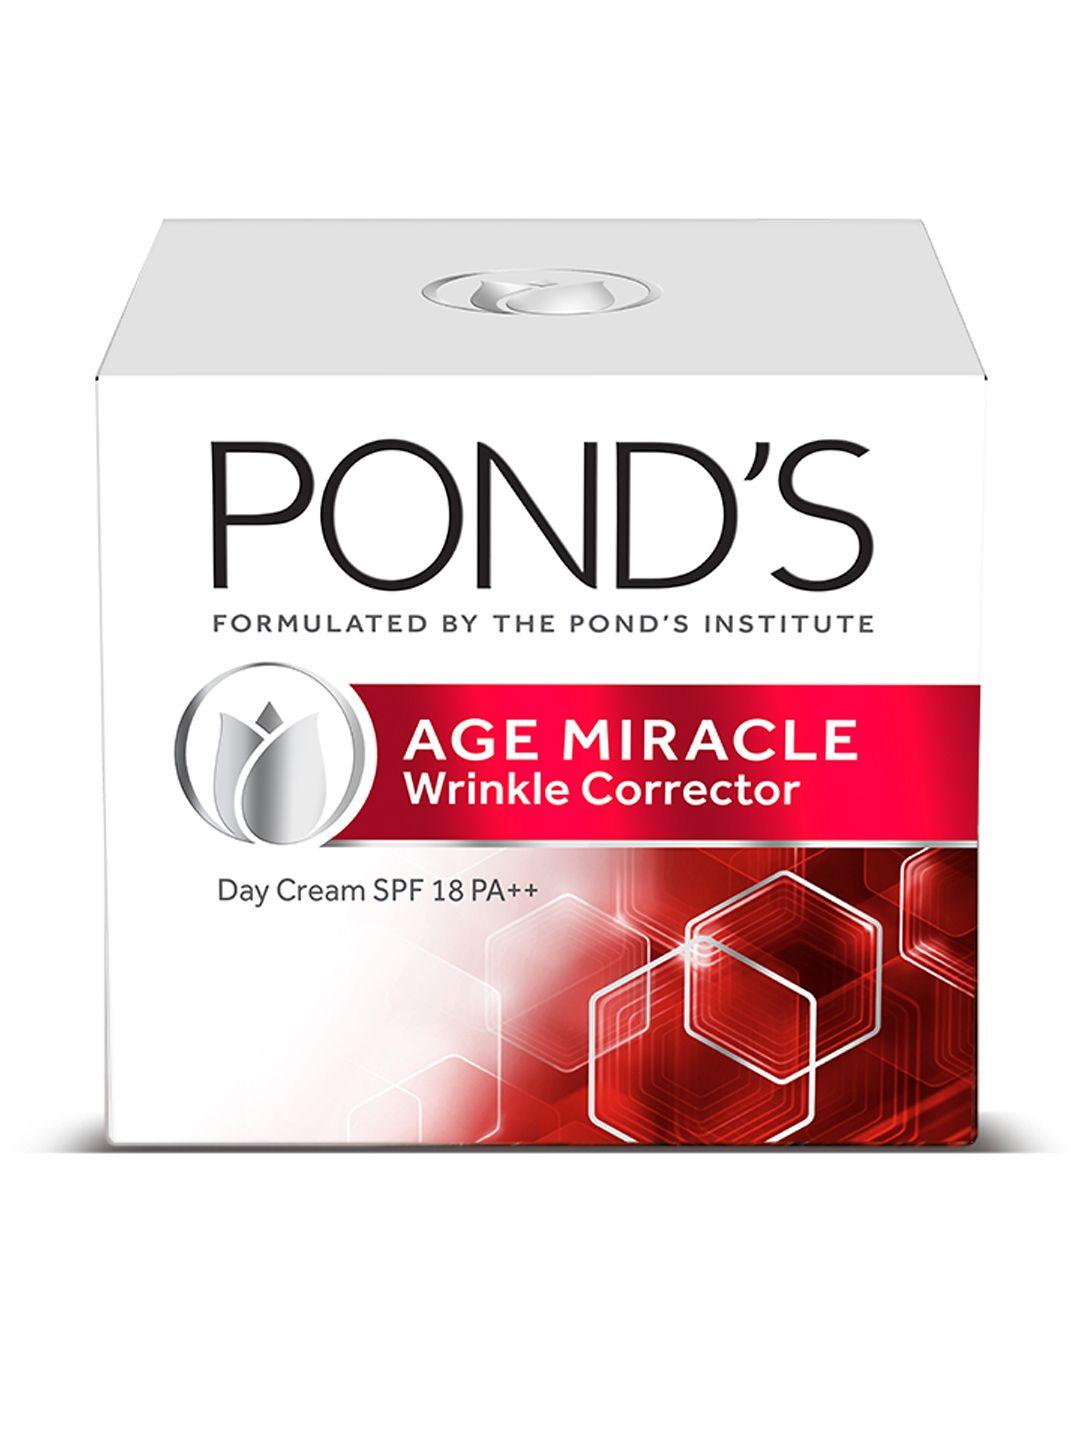 pond's-age-miracle-wrinkle-corrector-day-cream-spf-18-pa++-20g